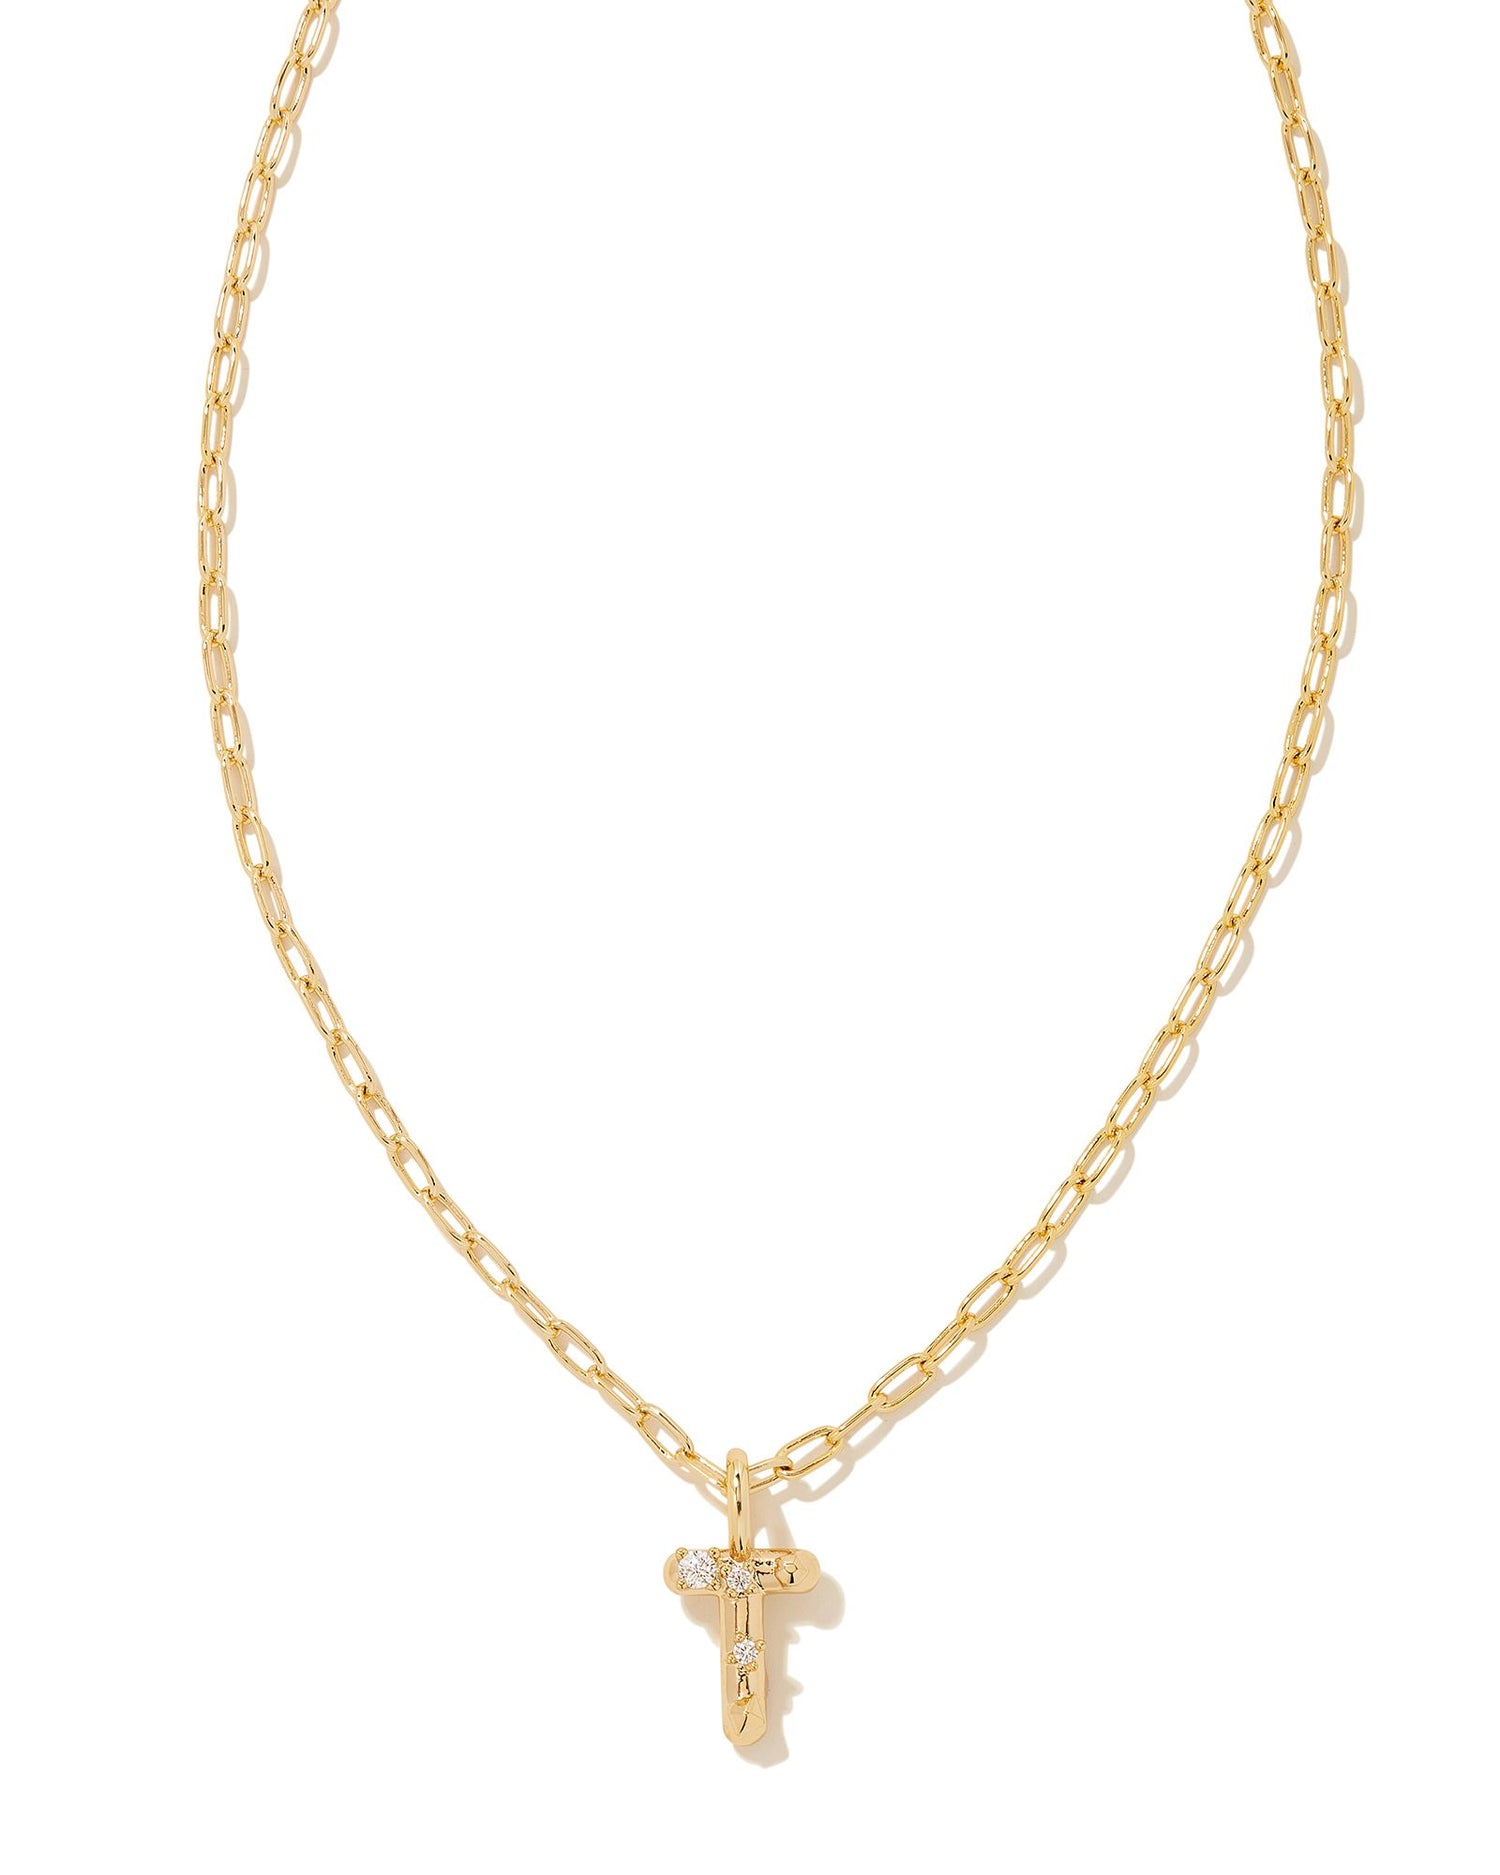 Personalize your everyday look with the Crystal Letter Short Pendant Necklace in White Crystal. Whether you’re rocking your initial or a loved one’s, this sentimental layer is one you’ll keep coming back to again and again.  Dimensions- 16' CHAIN WITH 3' EXTENDER, 0.62'L X 0.35"W PENDANT Metal- 14K Gold plated over brass Closure- Lobster Clasp Material-   White CZ Letter T